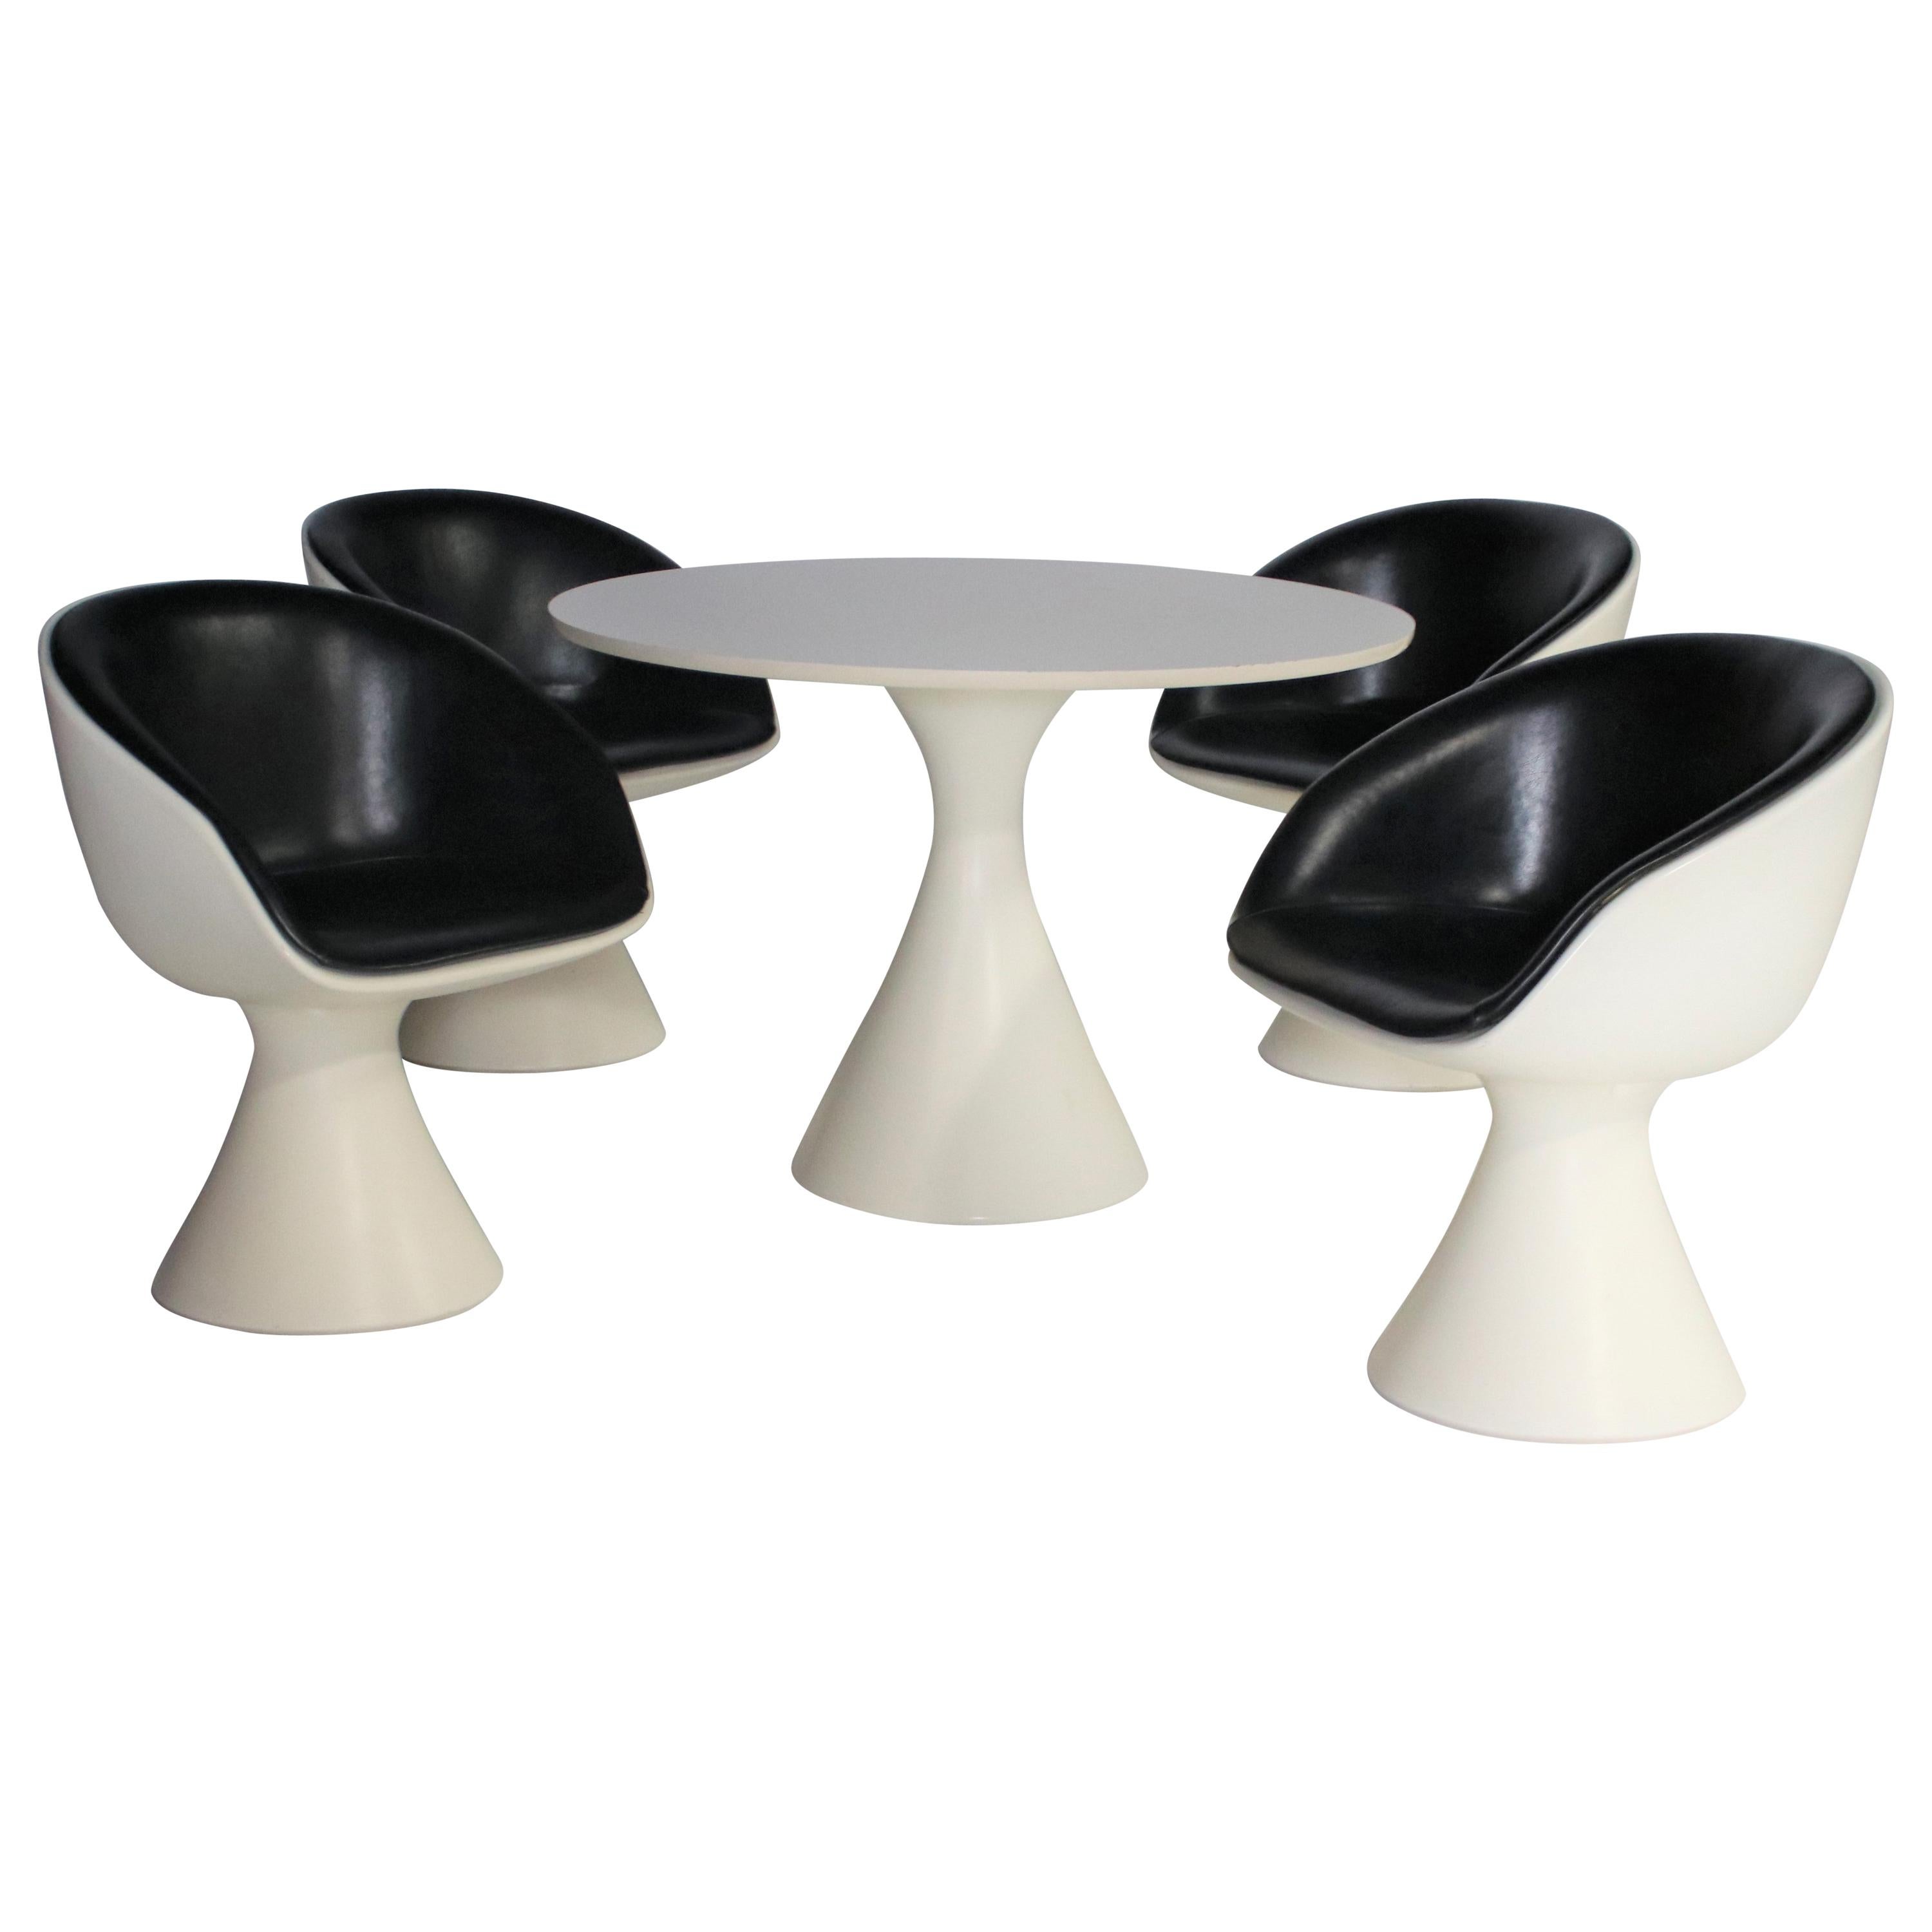 Midcentury Space Age Modern Dining Set by Hollen, Inc